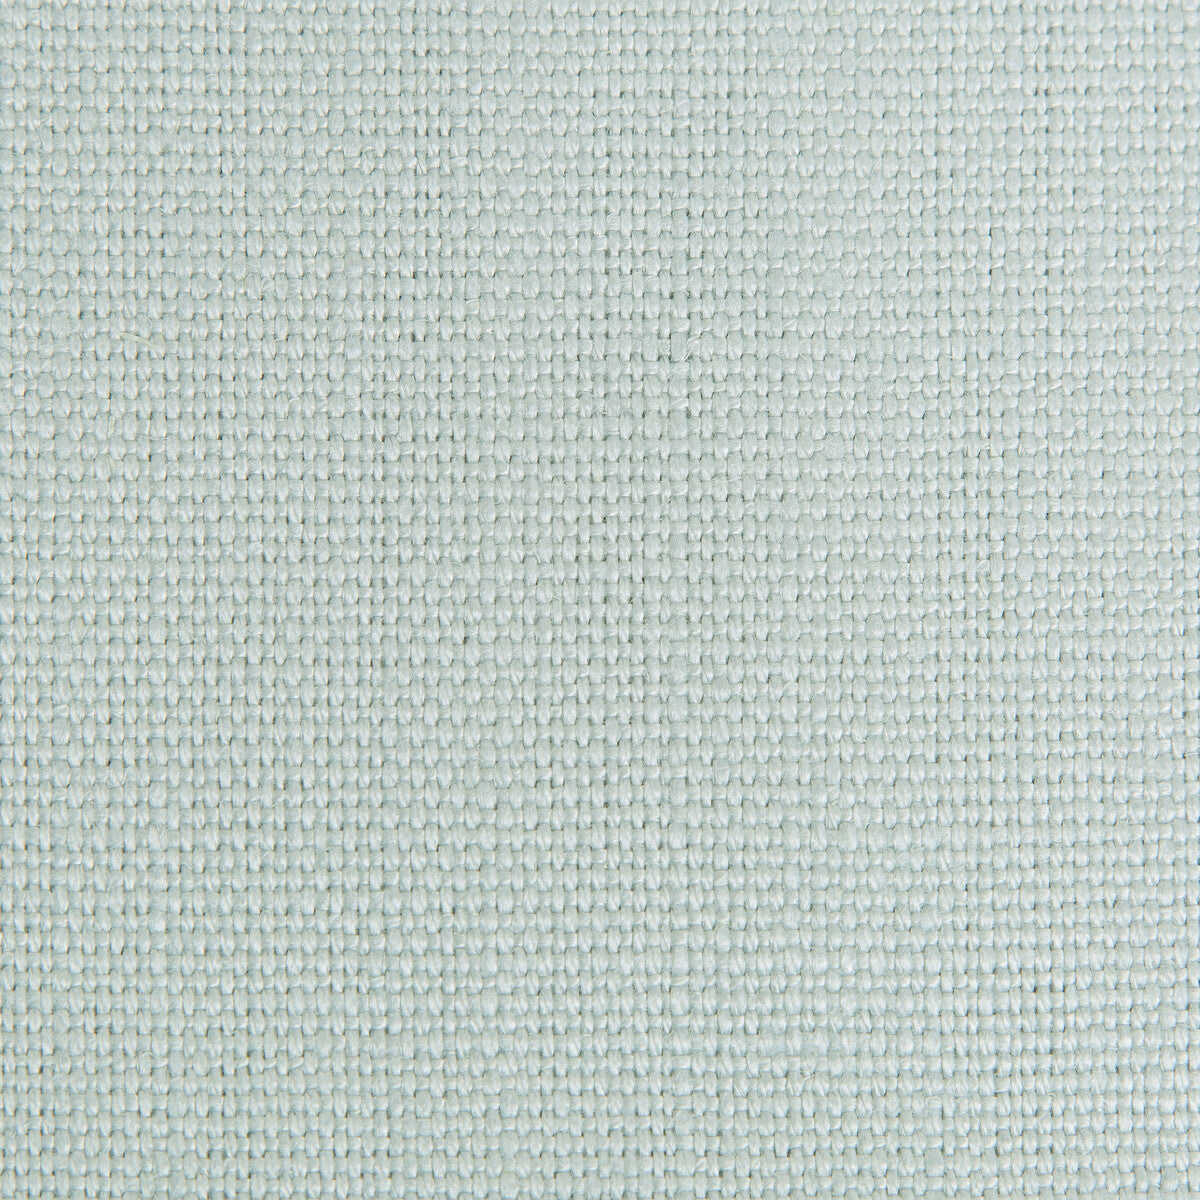 Kravet Couture fabric in 34813-1501 color - pattern 34813.1501.0 - by Kravet Couture in the Mabley Handler collection